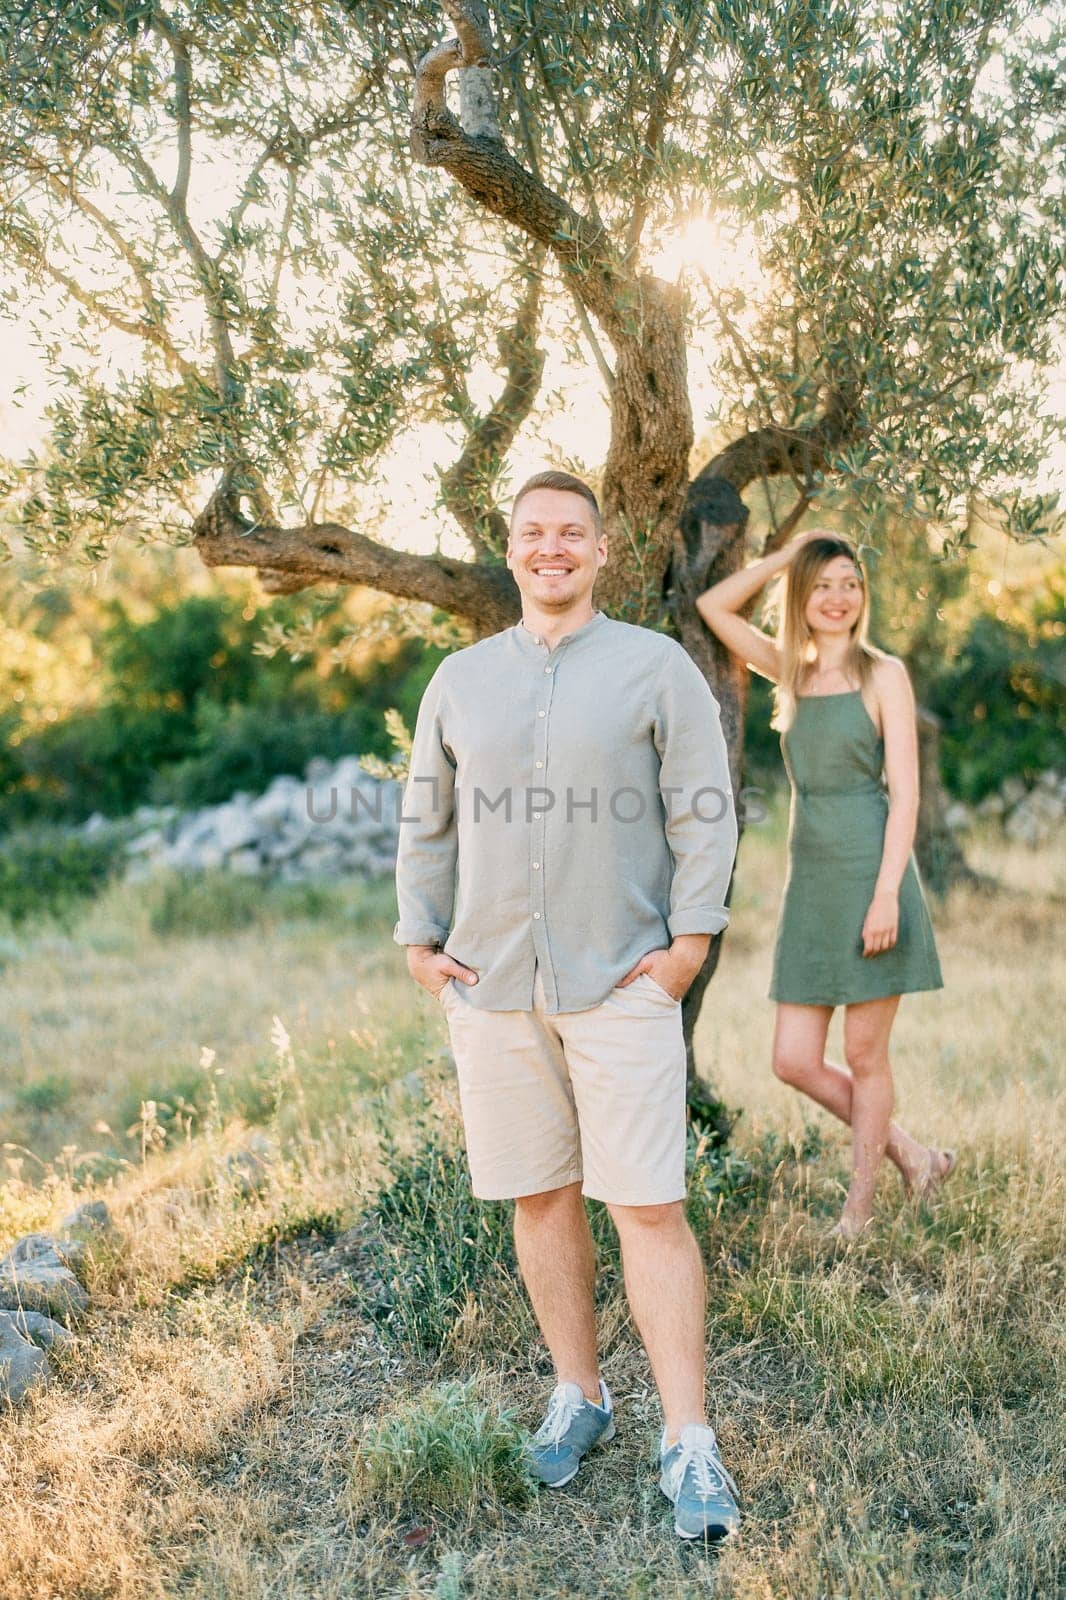 Girl stands leaning her elbow on a tree behind smiling guy with his hands in his pockets. High quality photo